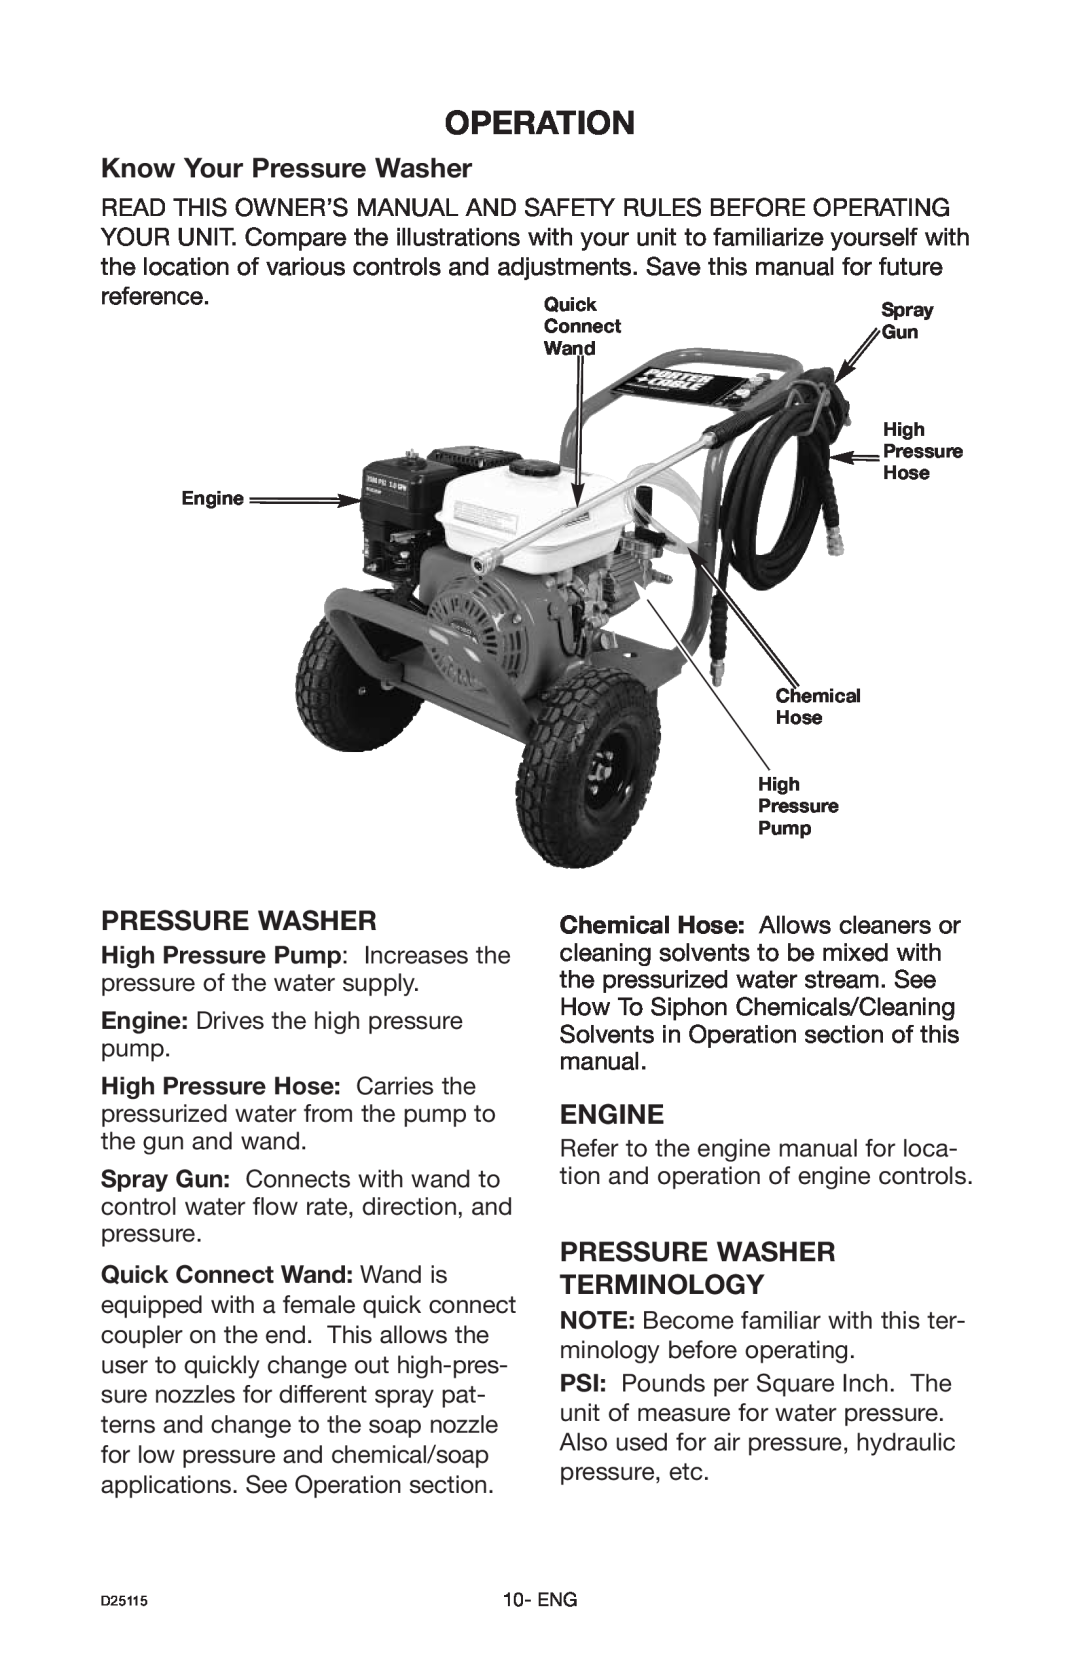 Porter-Cable PC2525SP, D25115-0112-0 Operation, Know Your Pressure Washer, Engine, Pressure Washer Terminology 